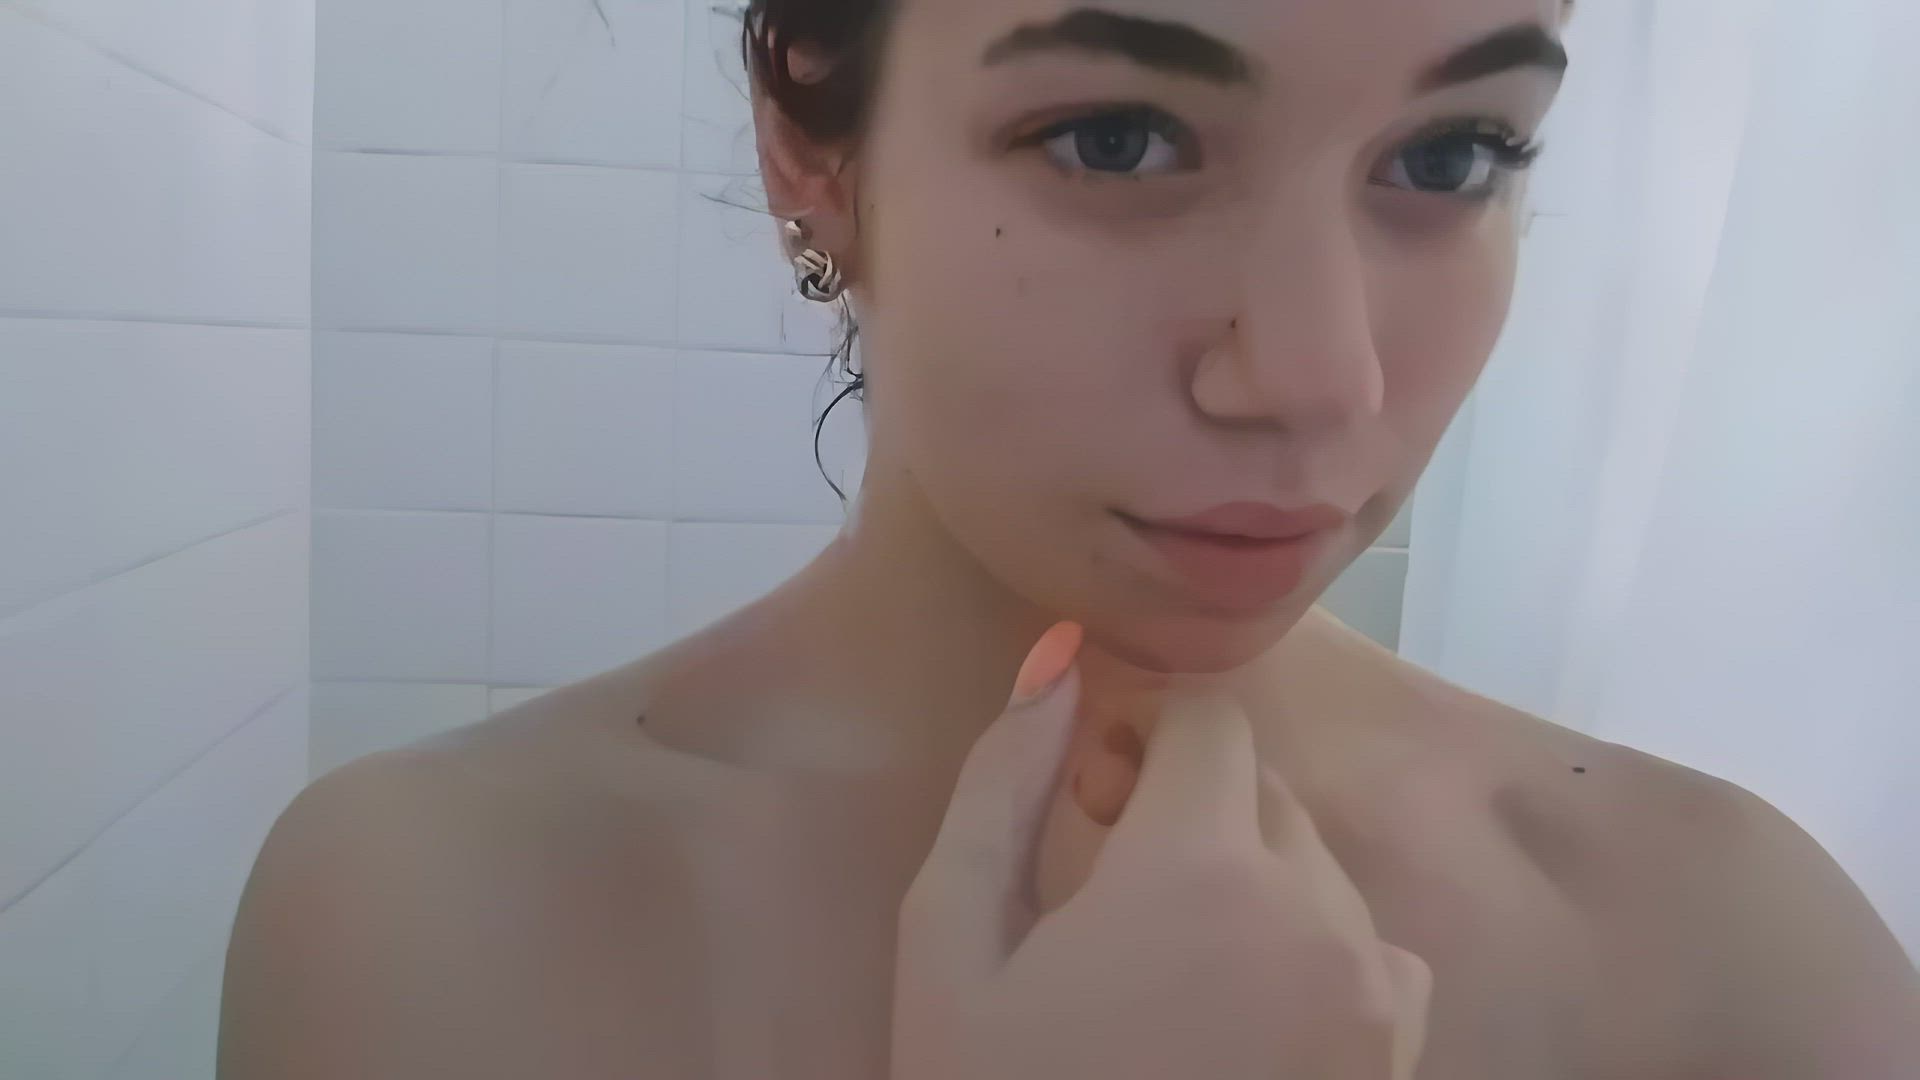 Shower porn video with onlyfans model allicatcollared <strong>@allicatcollared</strong>